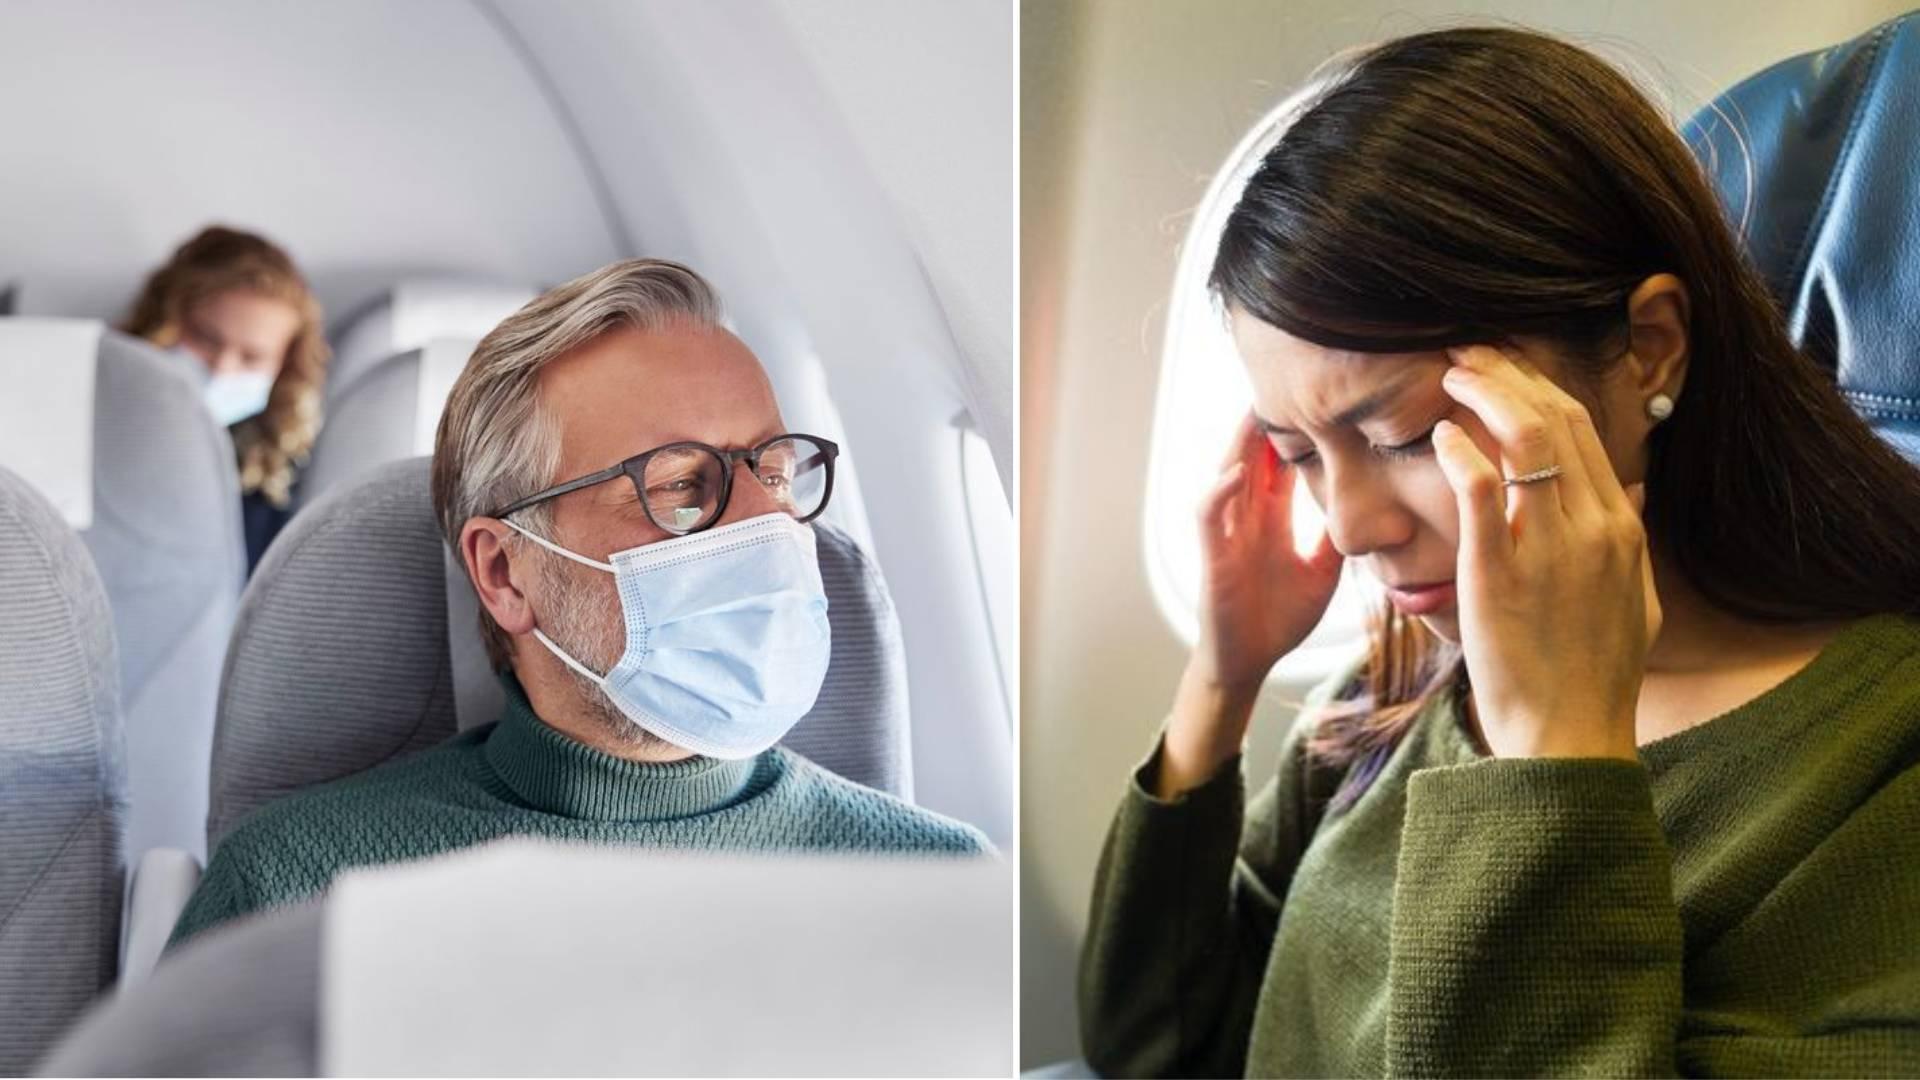 A collage of an airplane passenger wearing a nose mask and another feeling sick